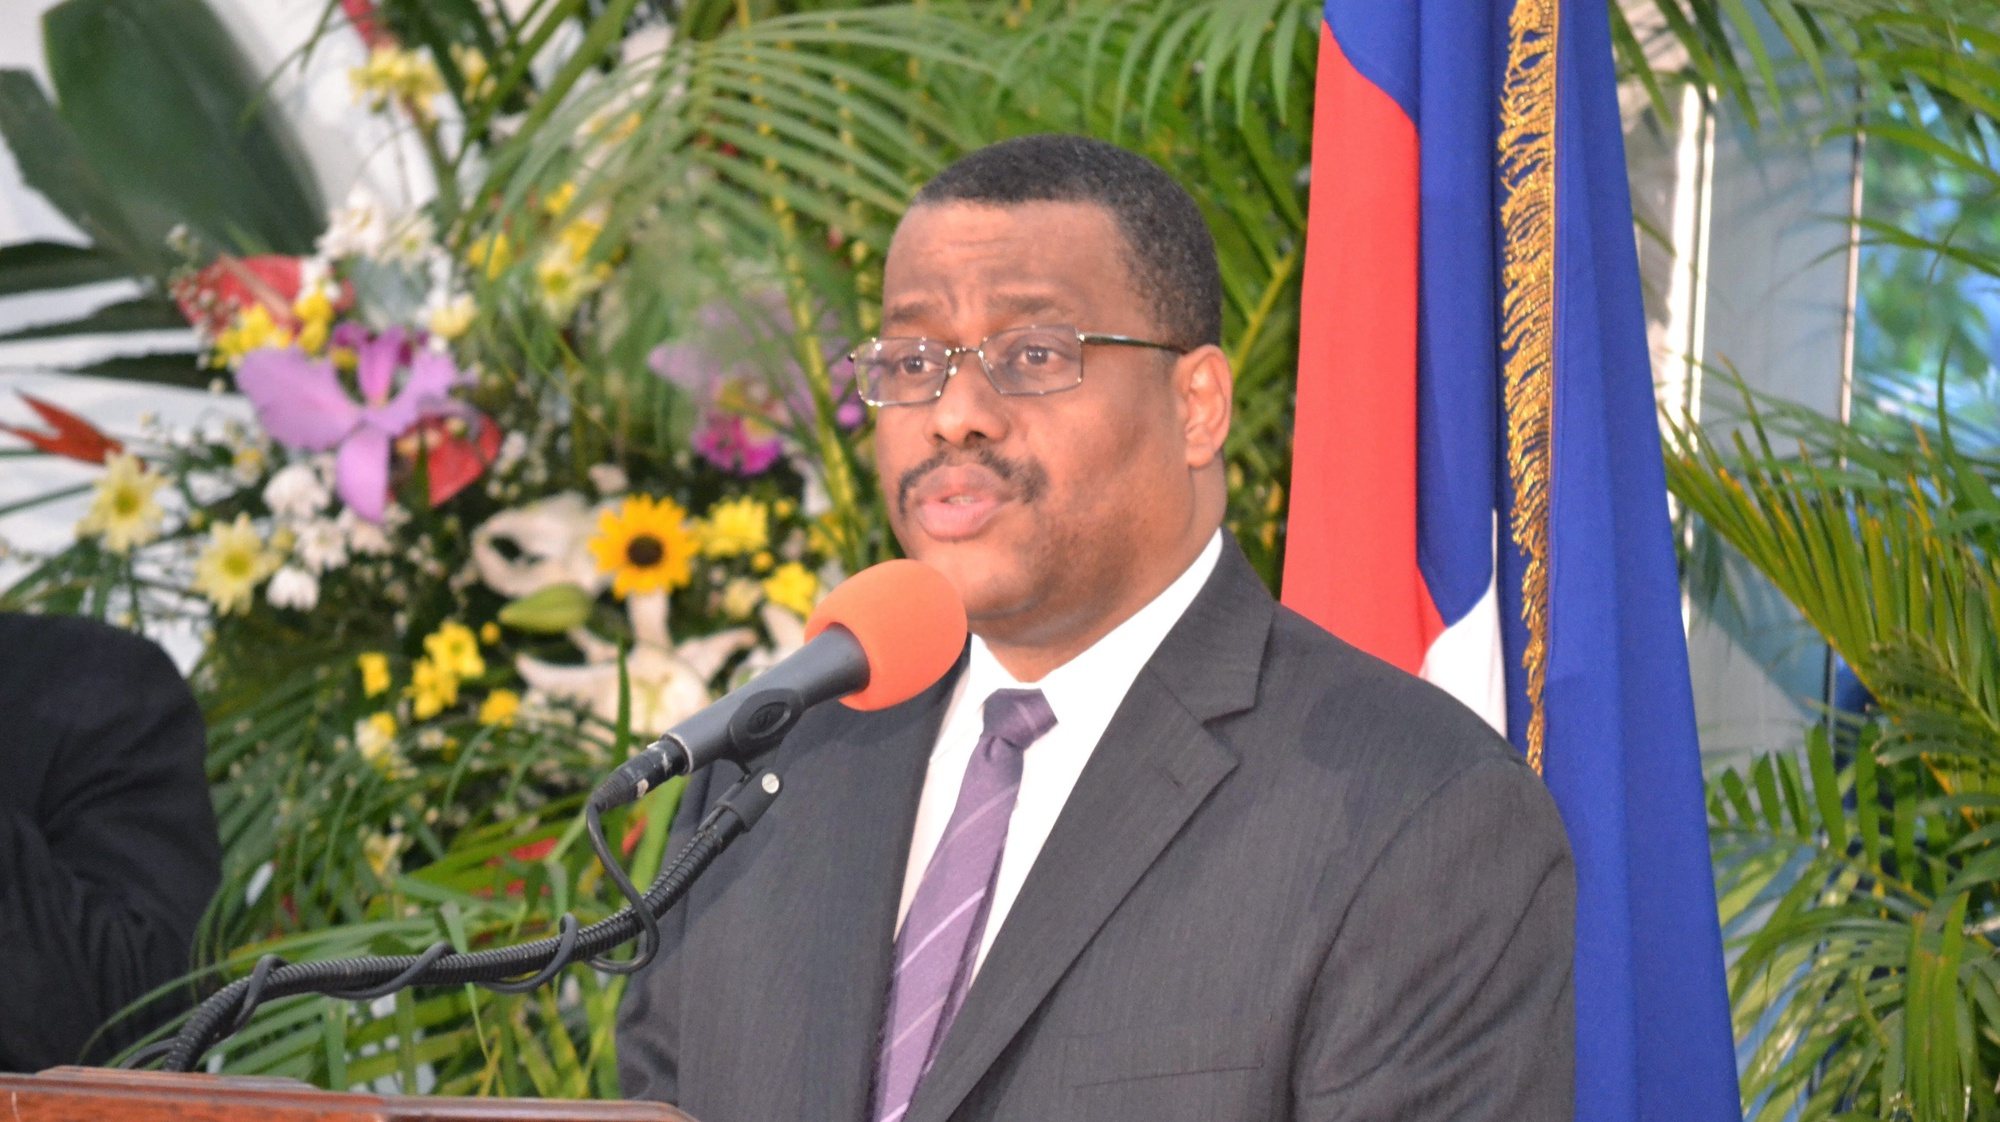 epa03120295 (FILE) A file photograph taken on 18 October 2011 shows Haitian Prime Minister Garry Conille speaking during his swear in ceremony in Port au Prince, Haiti. Reports state that Conille resigned on 24 February 2012.  EPA/Jean Jacques Augustin